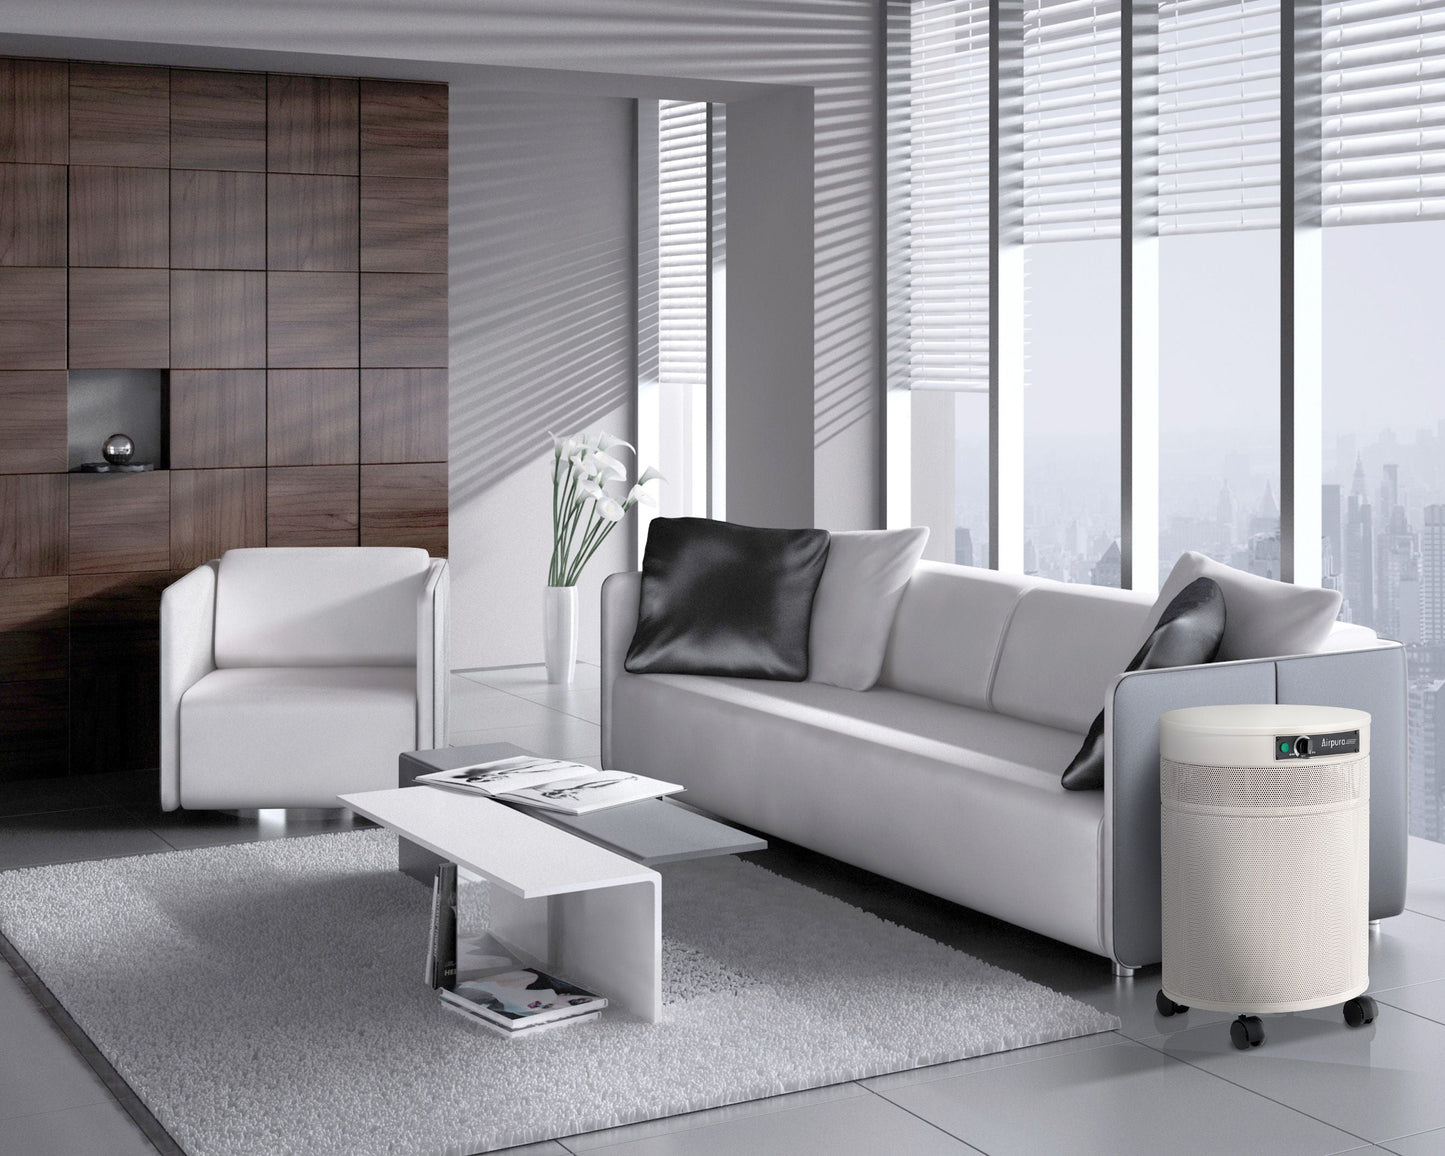 Living room with air purifier from Airpura Industrie